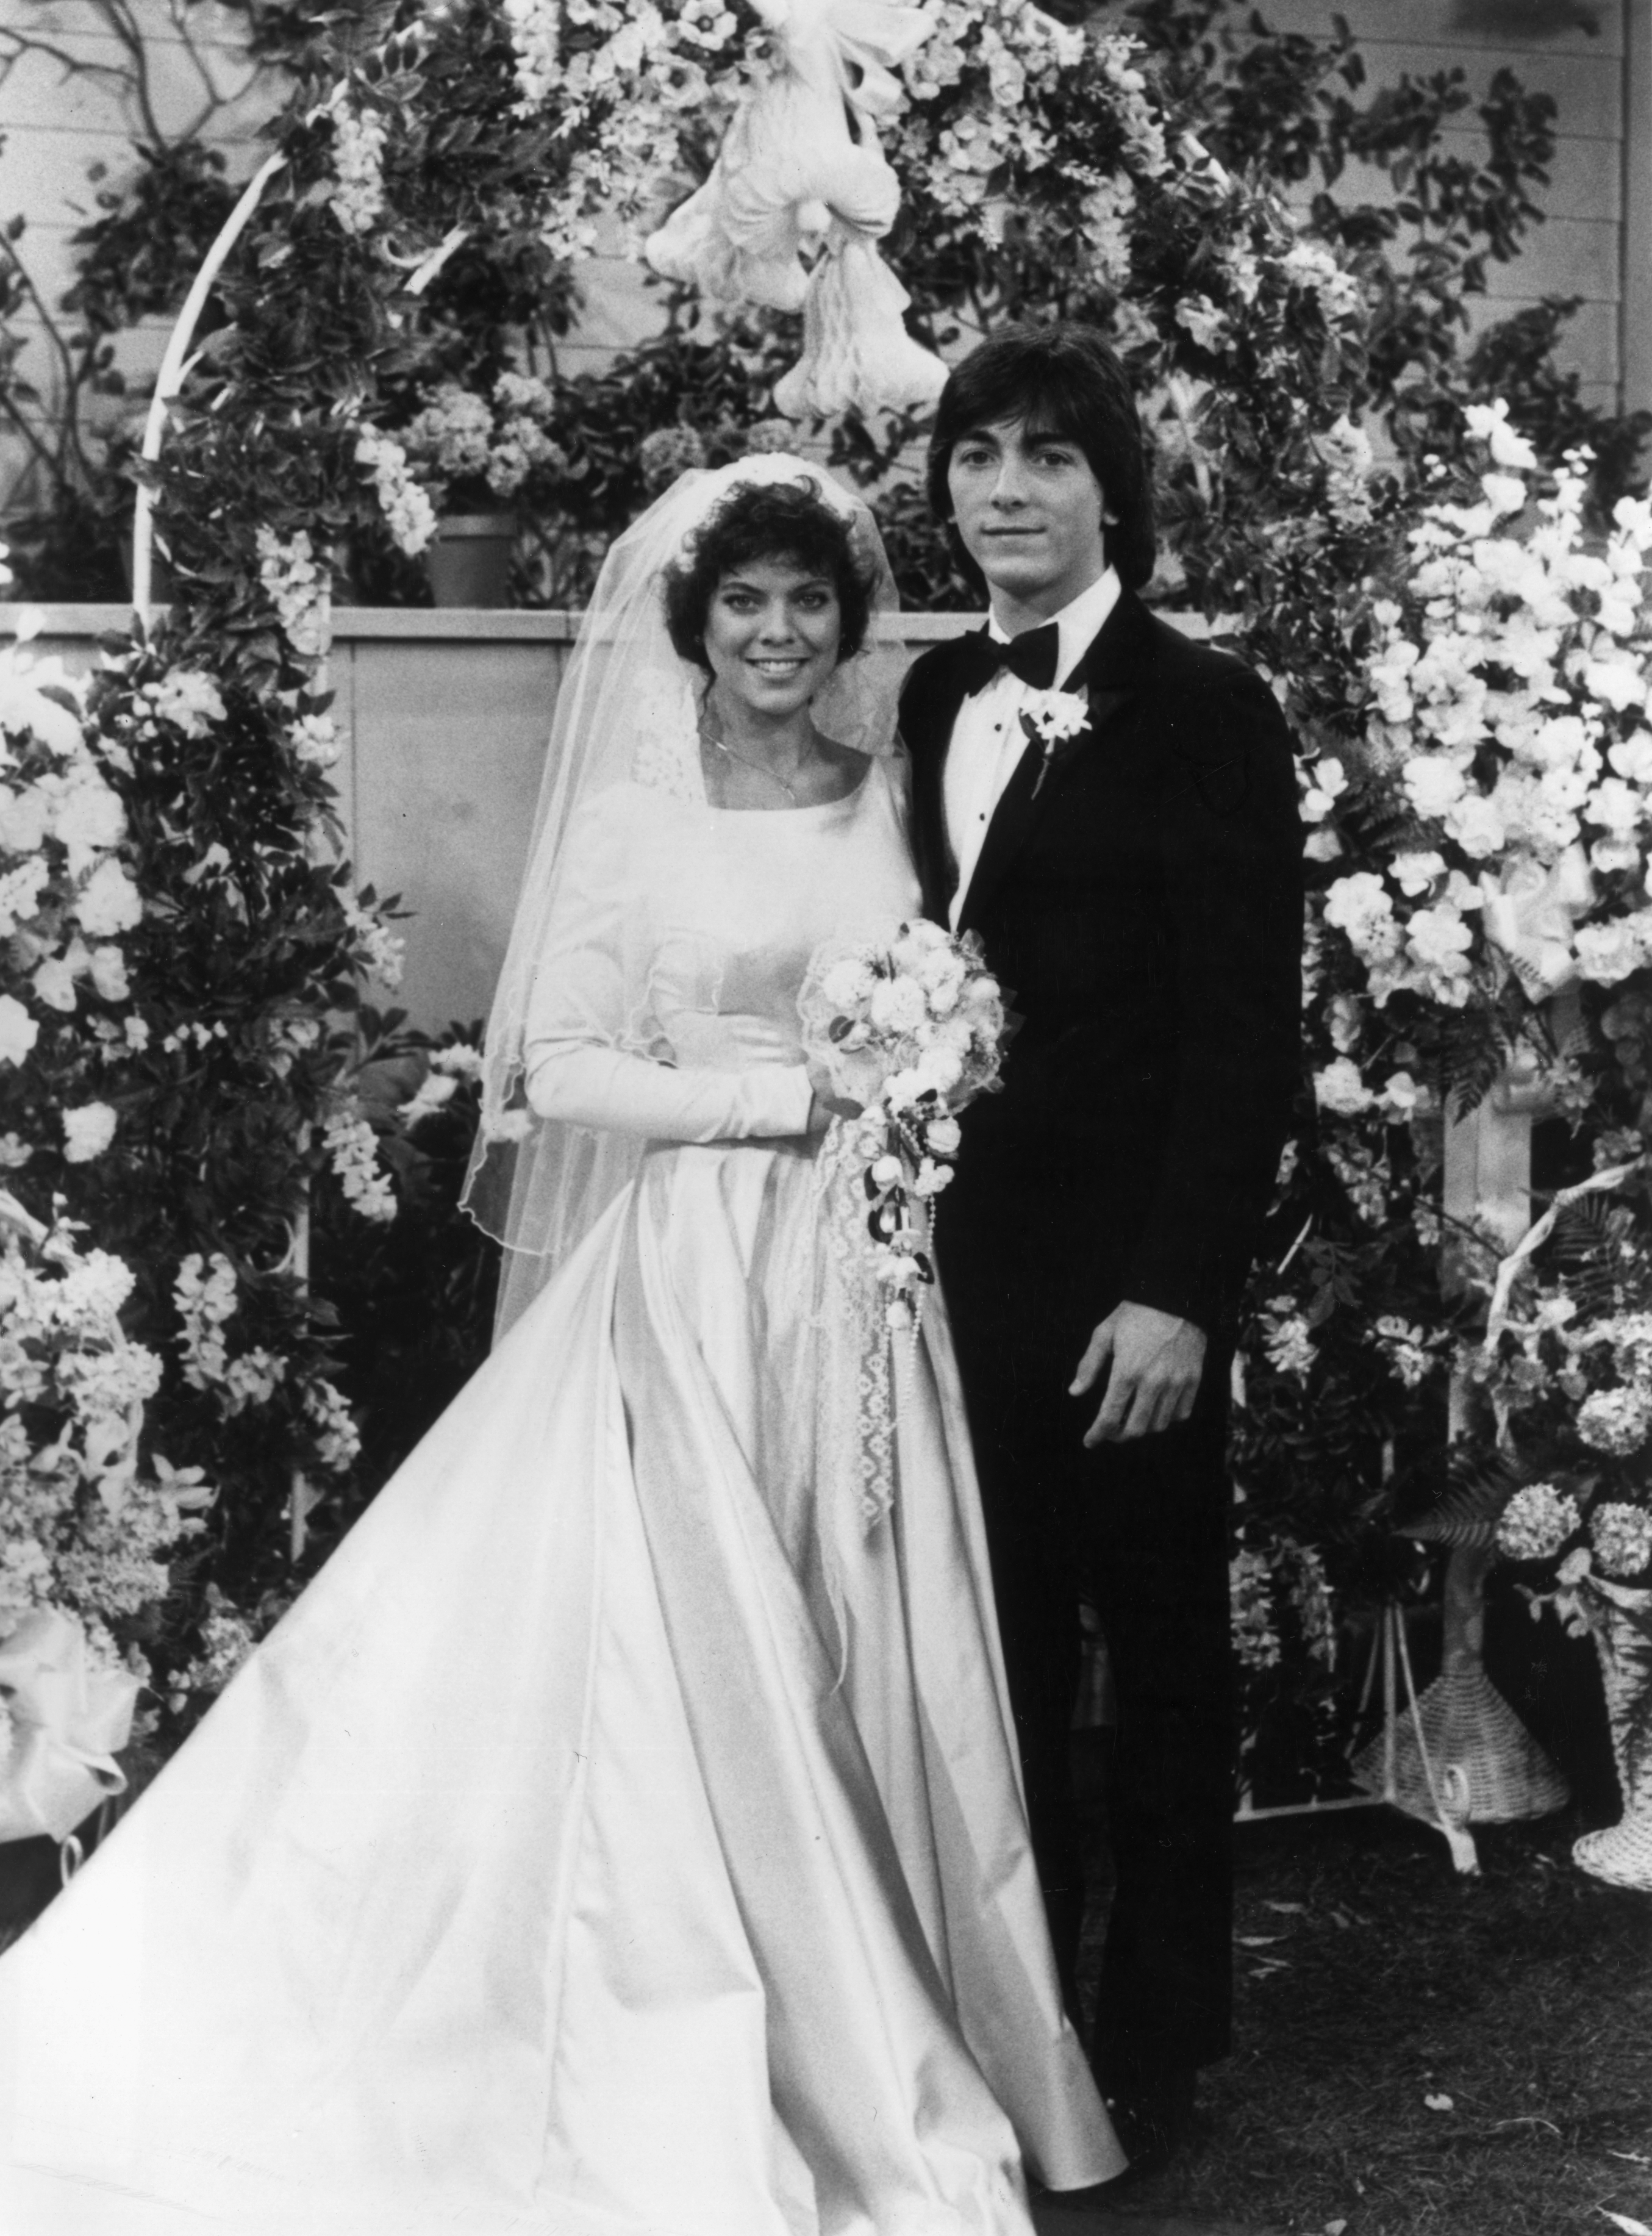 Erin Moran and Scott Baio on the set of "Happy Days" September 1,1979 | Source: Getty Images